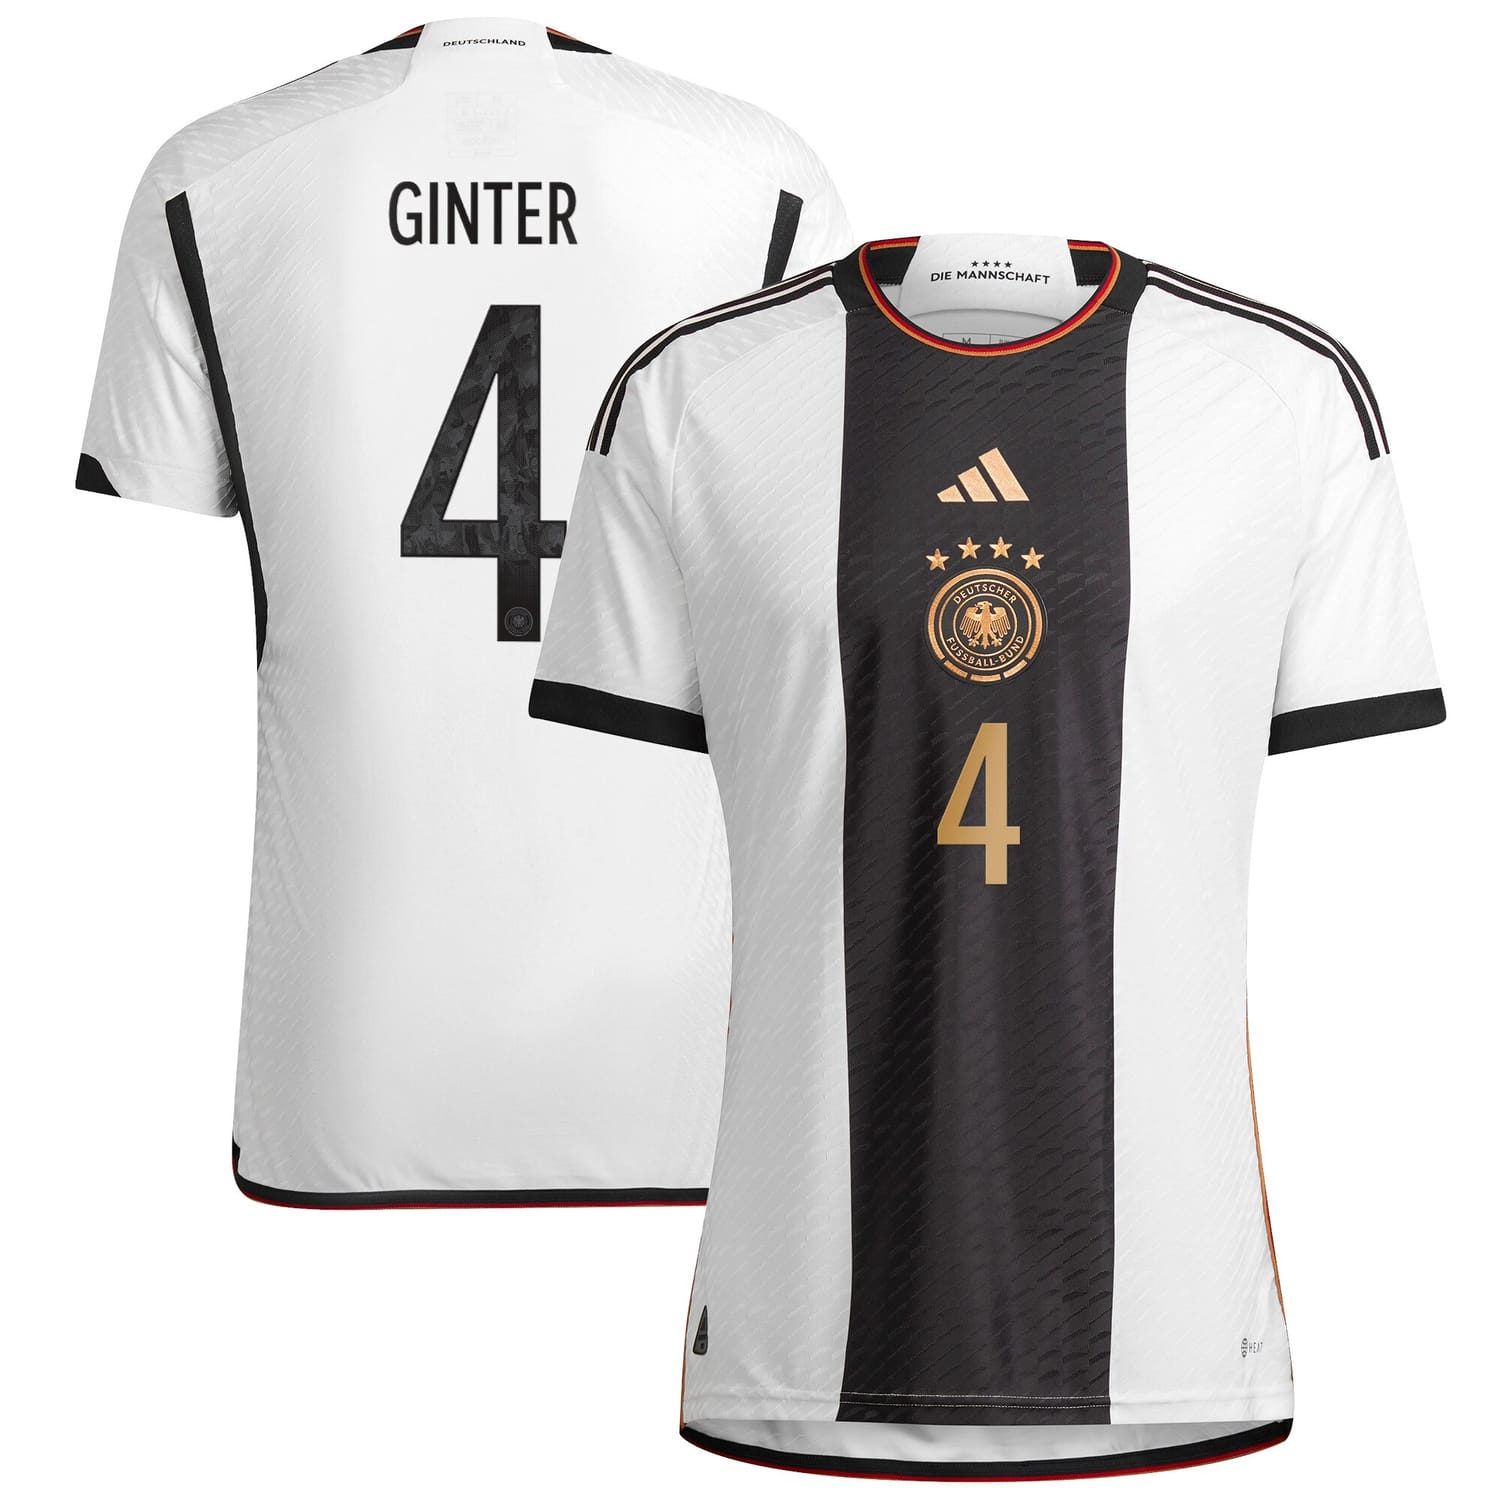 Germany National Team Home Authentic Jersey Shirt player Matthias Ginter 4 printing for Men